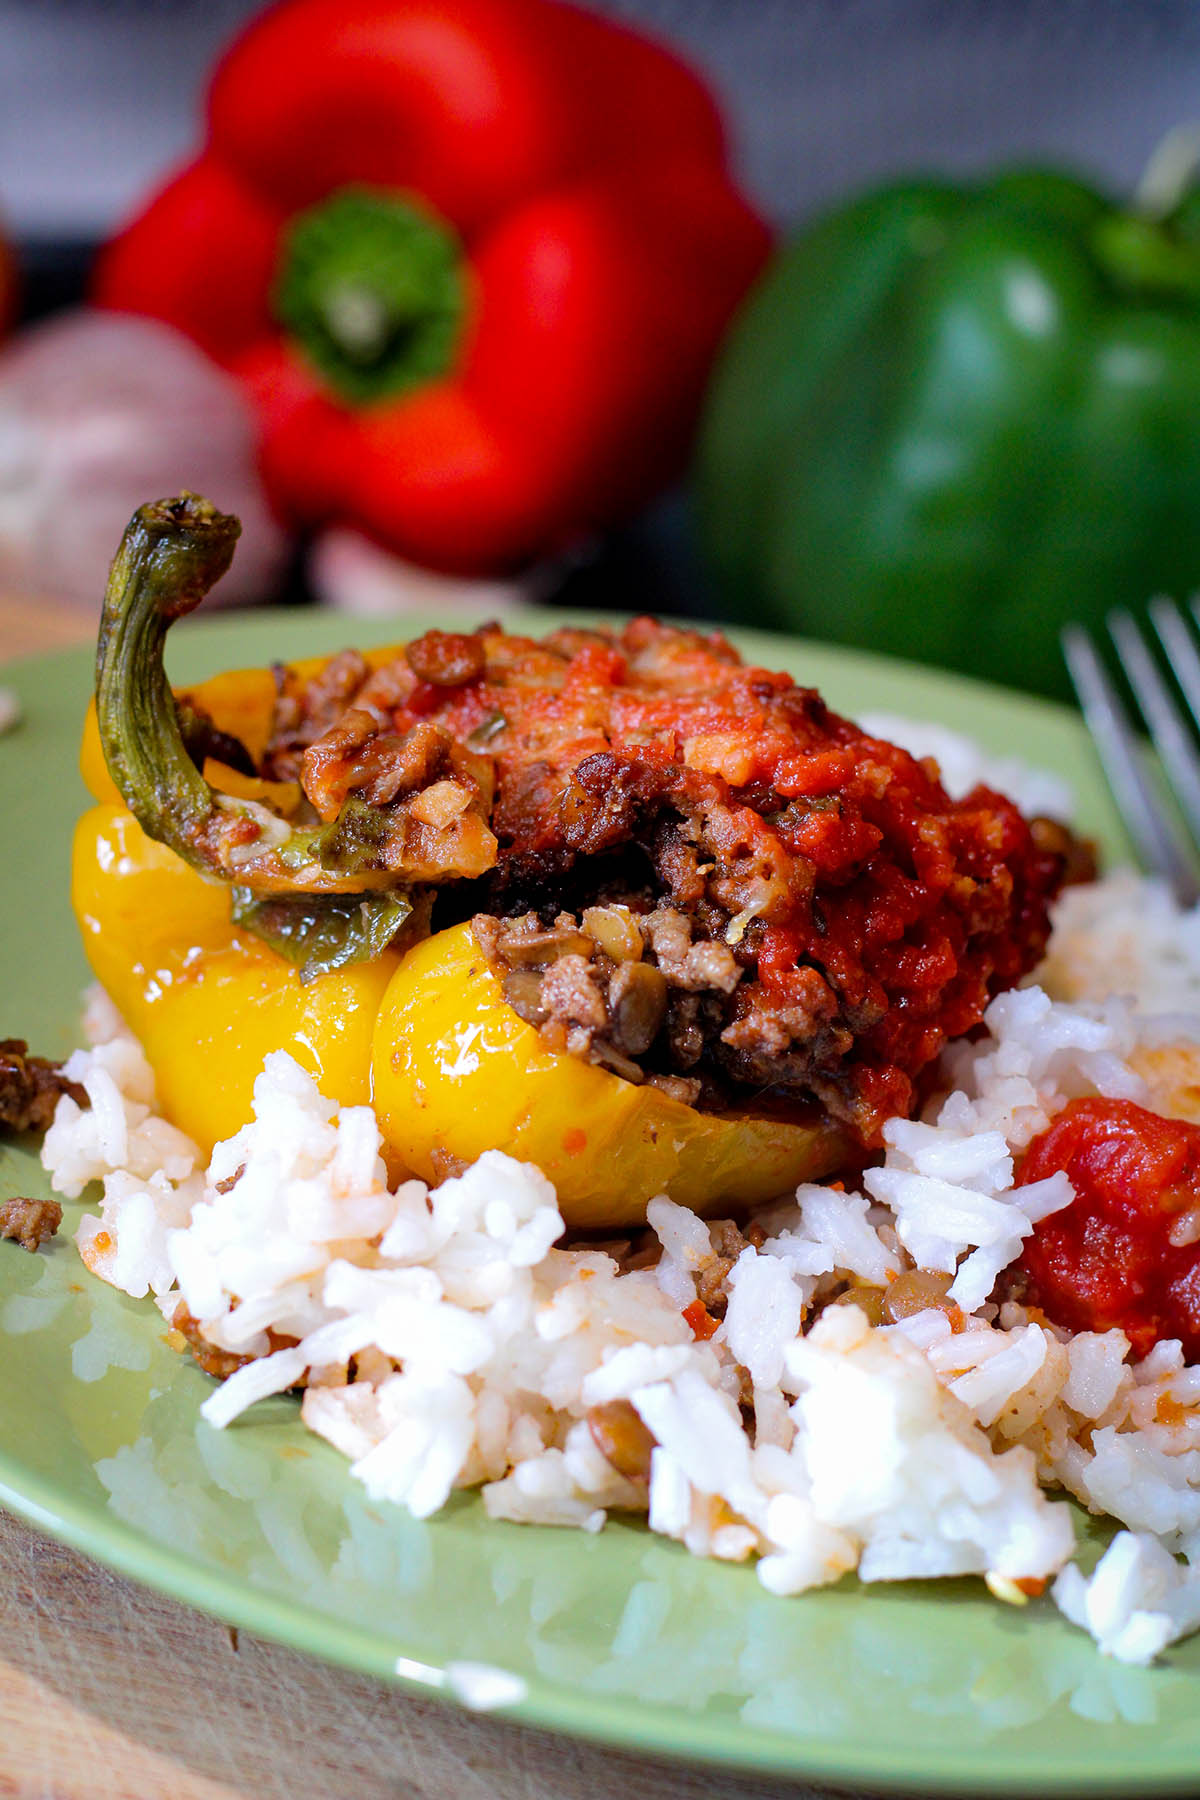 Half a yellow stuffed bell pepper topped with sauce and served over white rice.